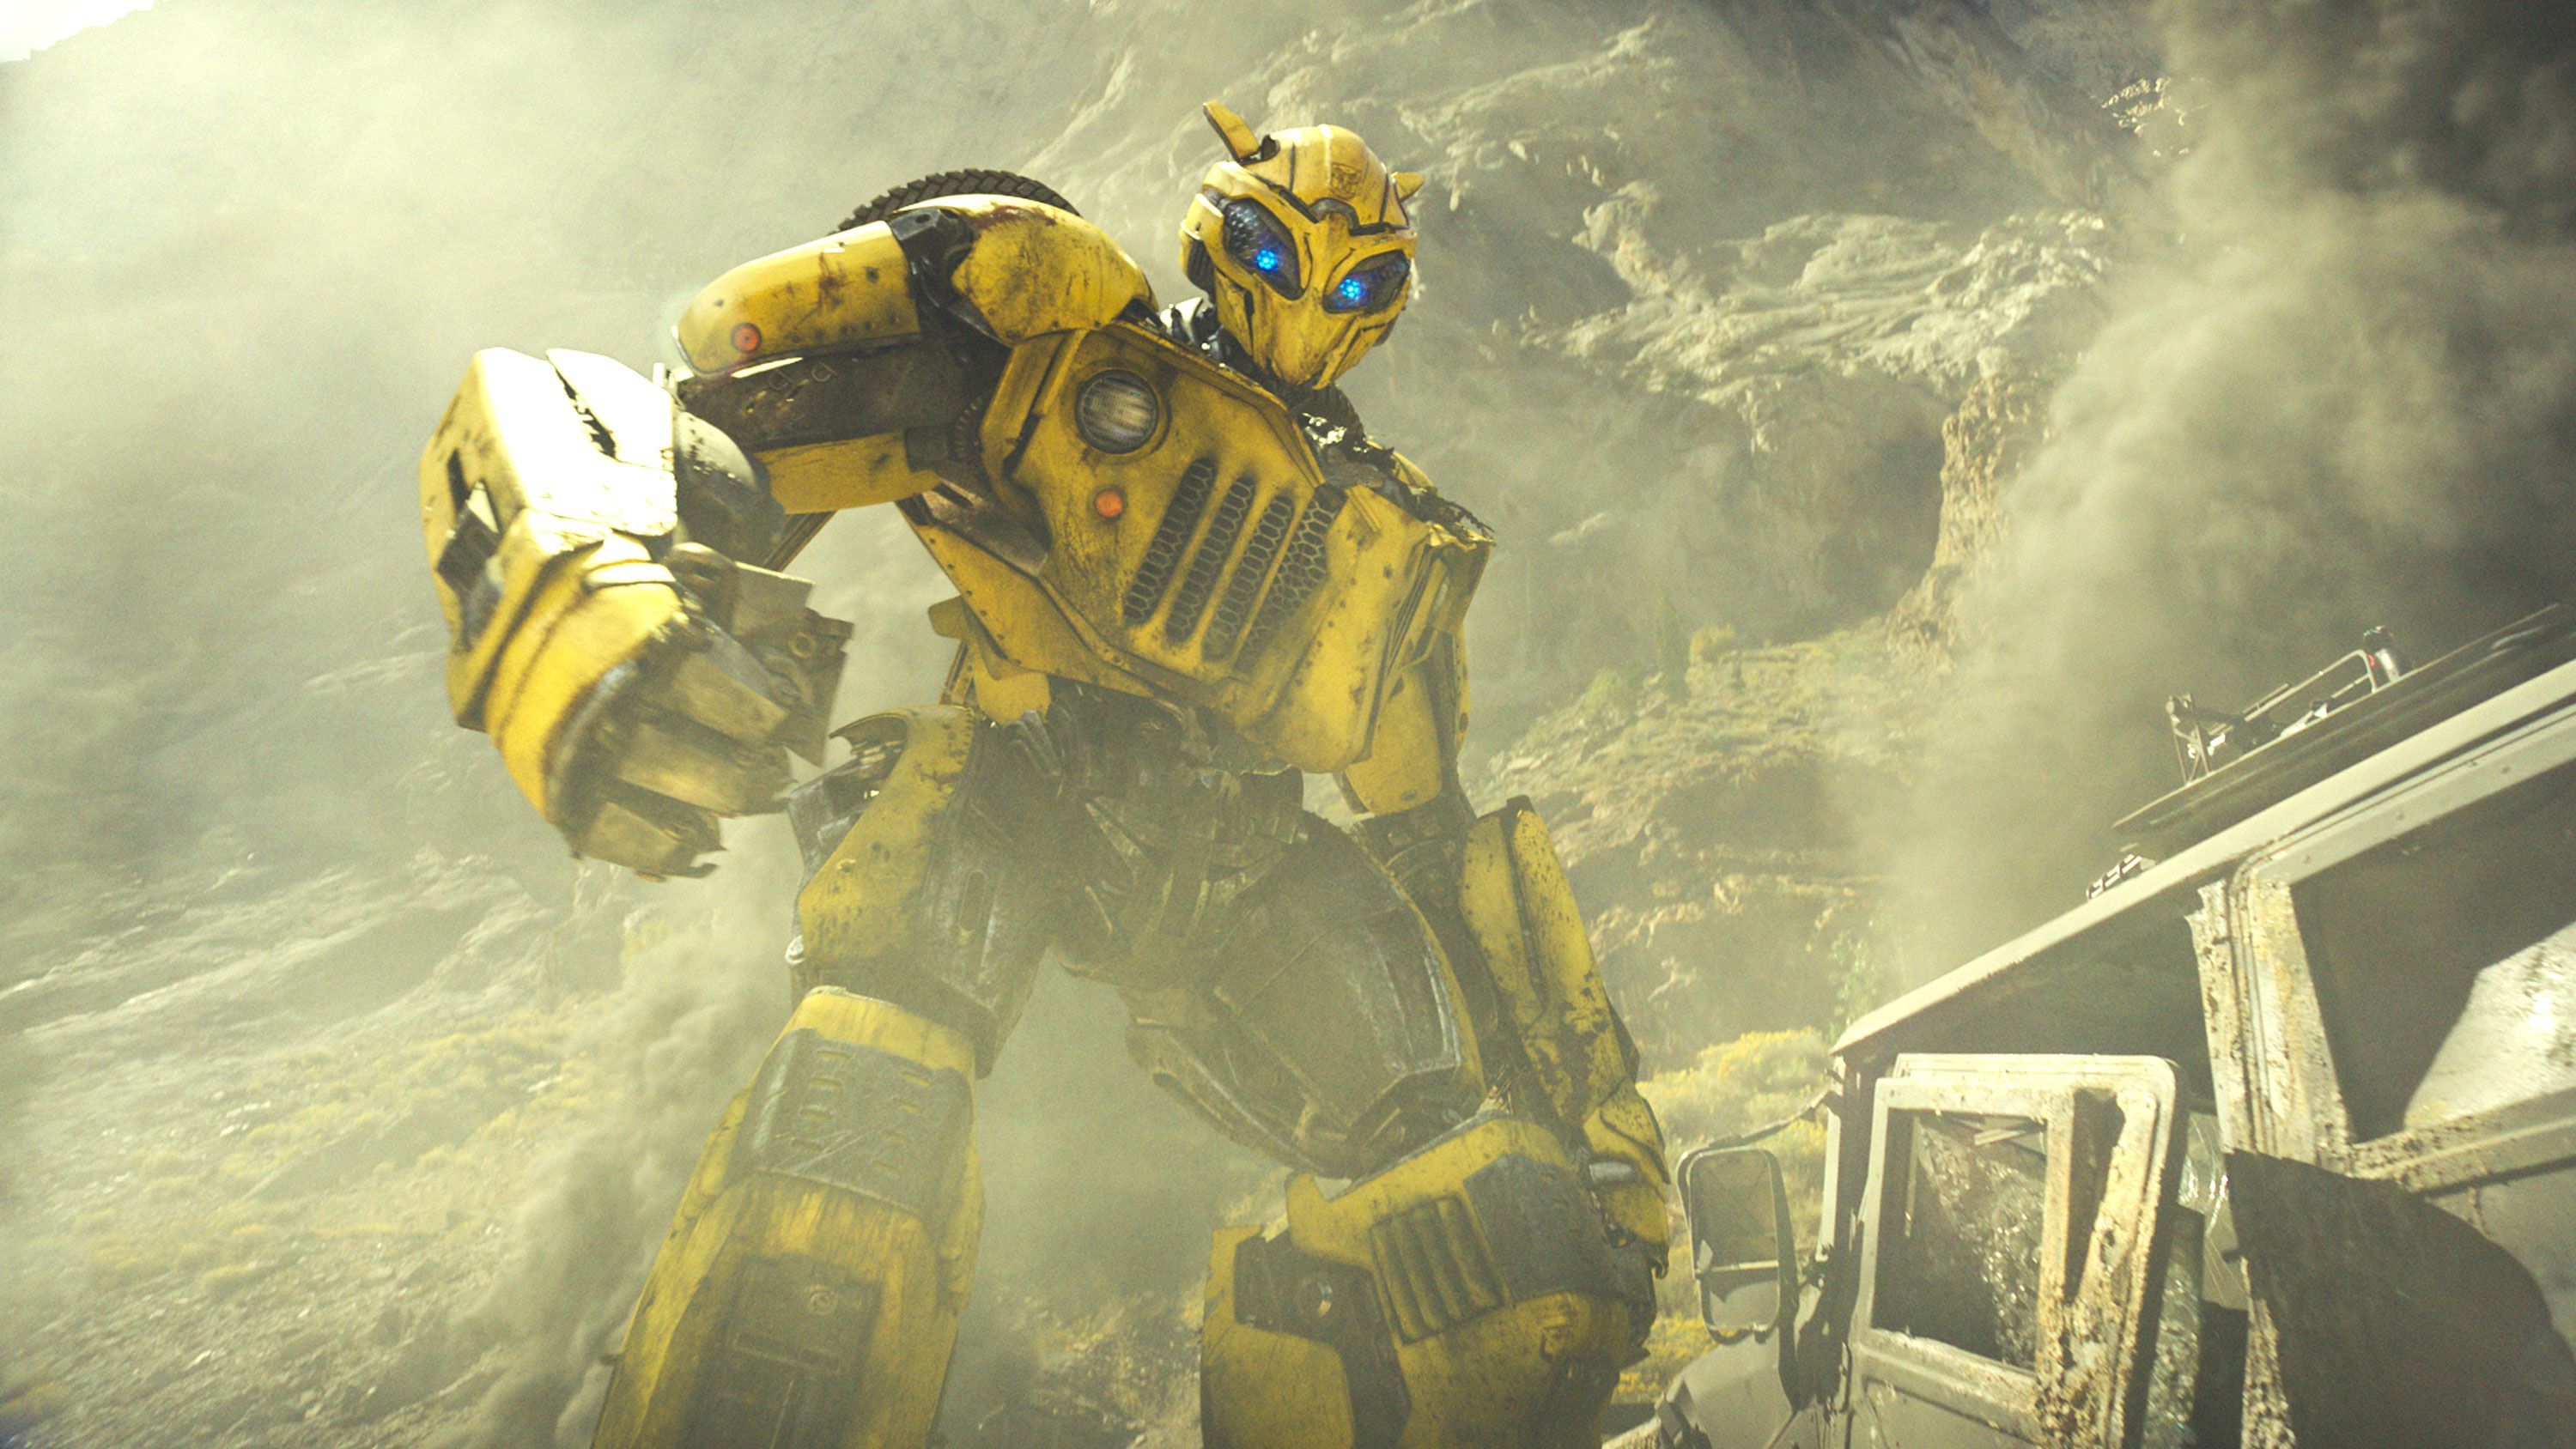 New Transformers movie gets 2022 release date